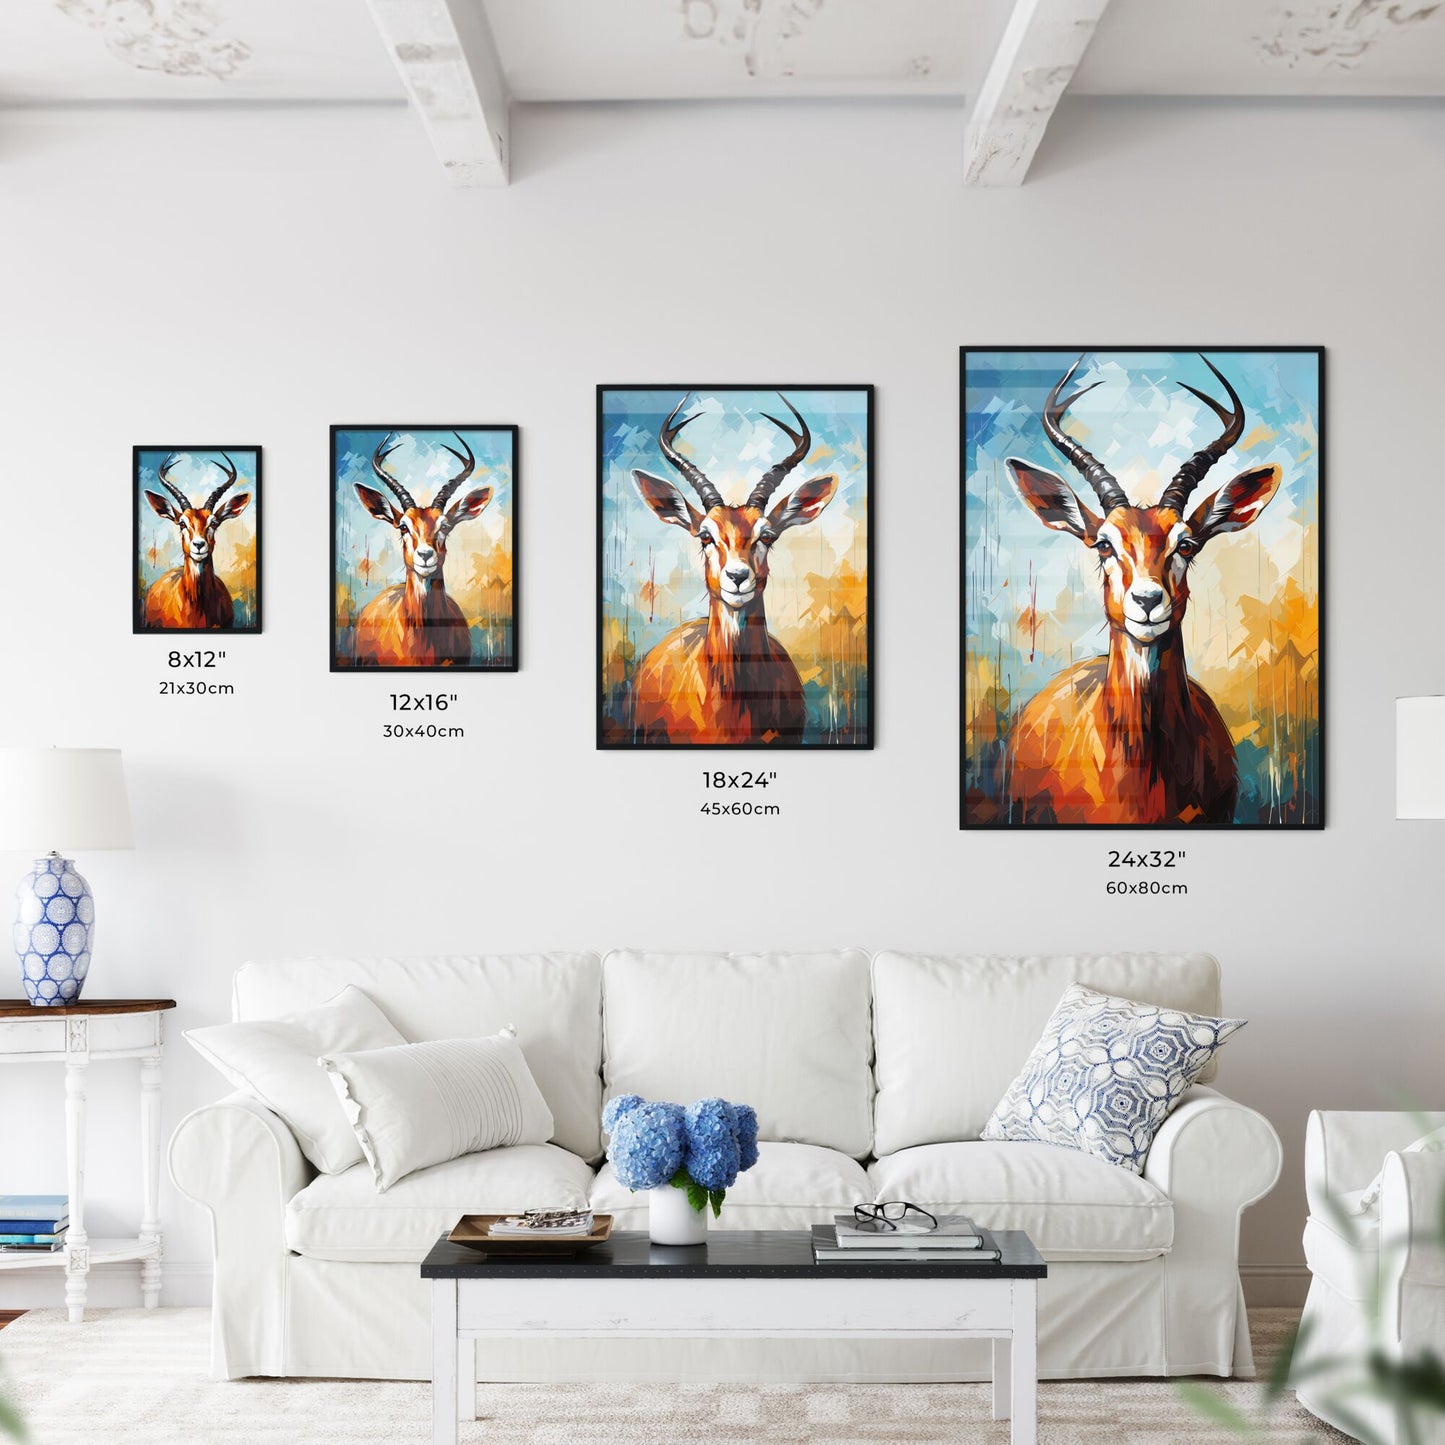 Endangered Bontebok Antelope - A Painting Of An Animal With Horns Default Title